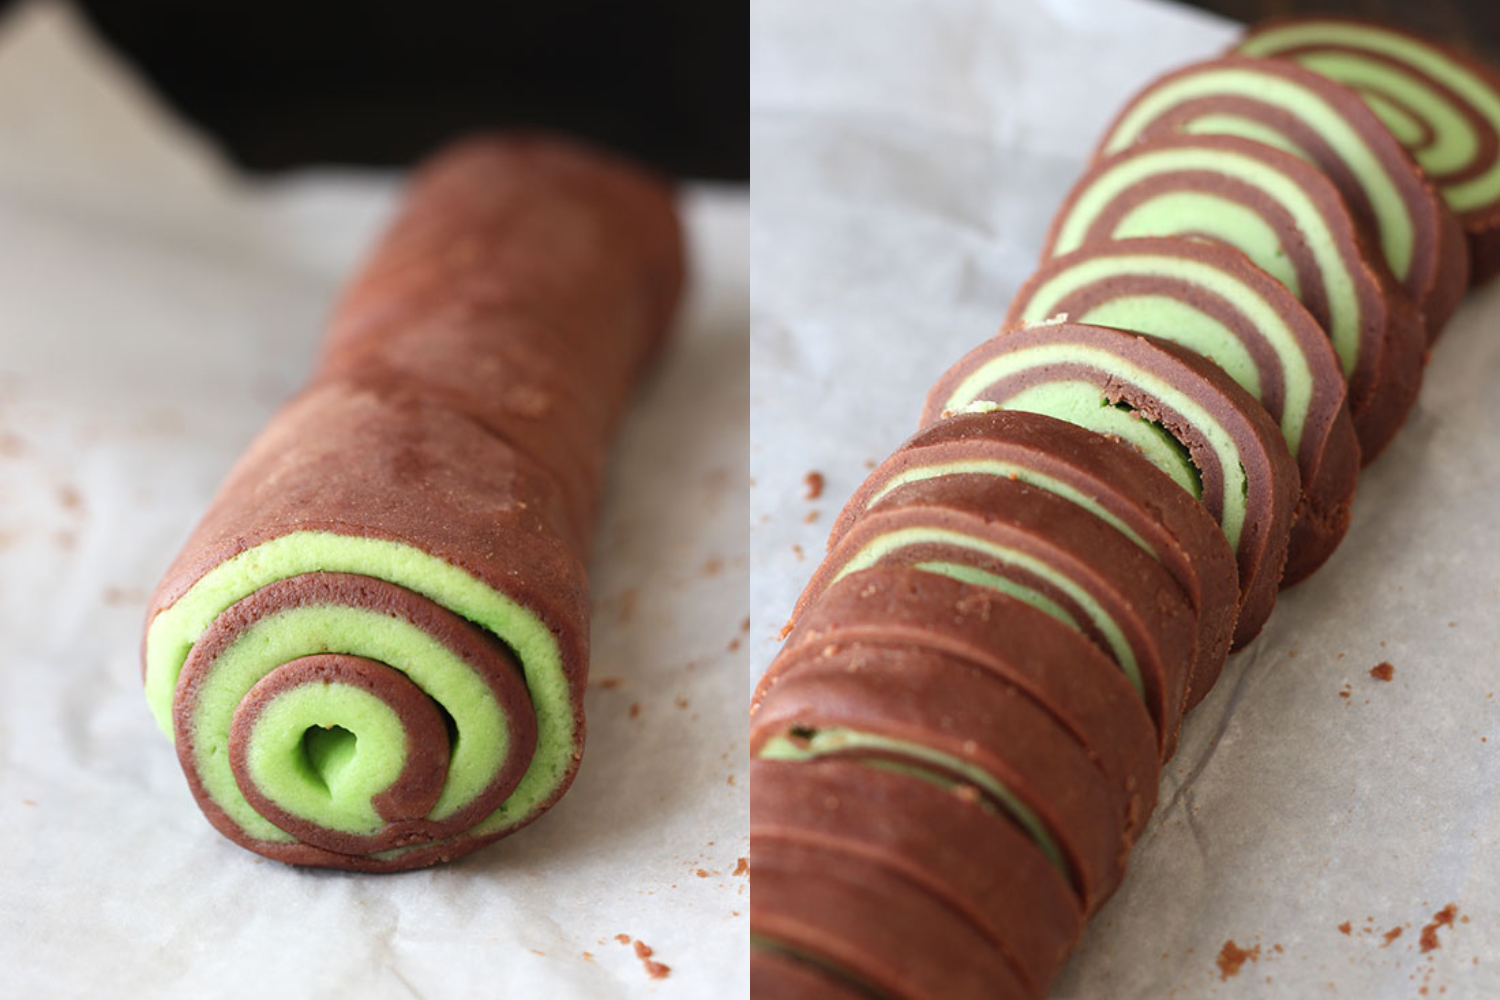 side-by-side images showing these pinwheel cookies being rolled up and sliced, before baking.